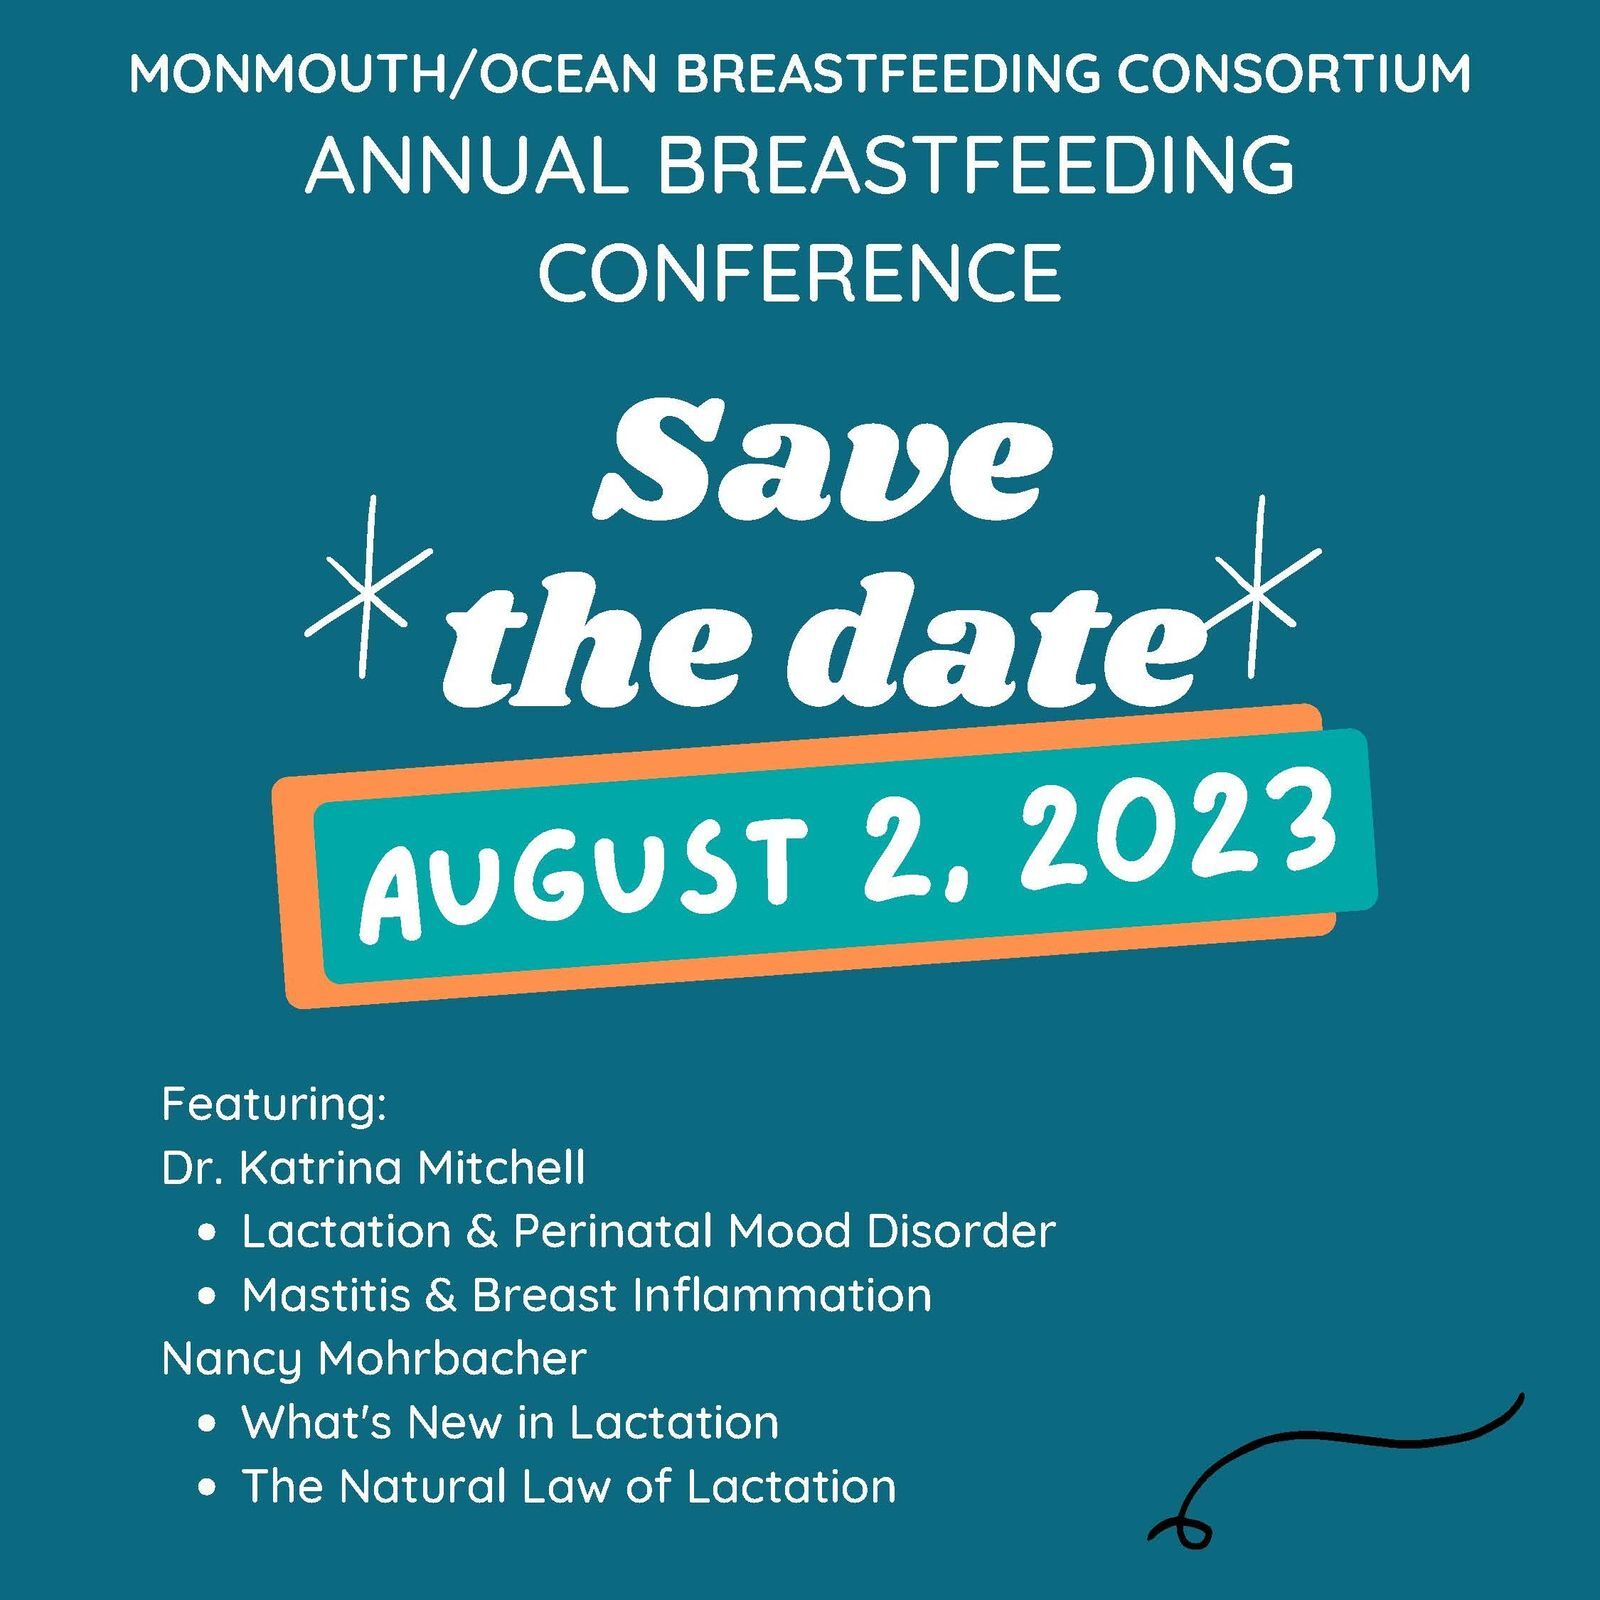 Annual Breastfeeding Conference! Save the Date August 2, 2023